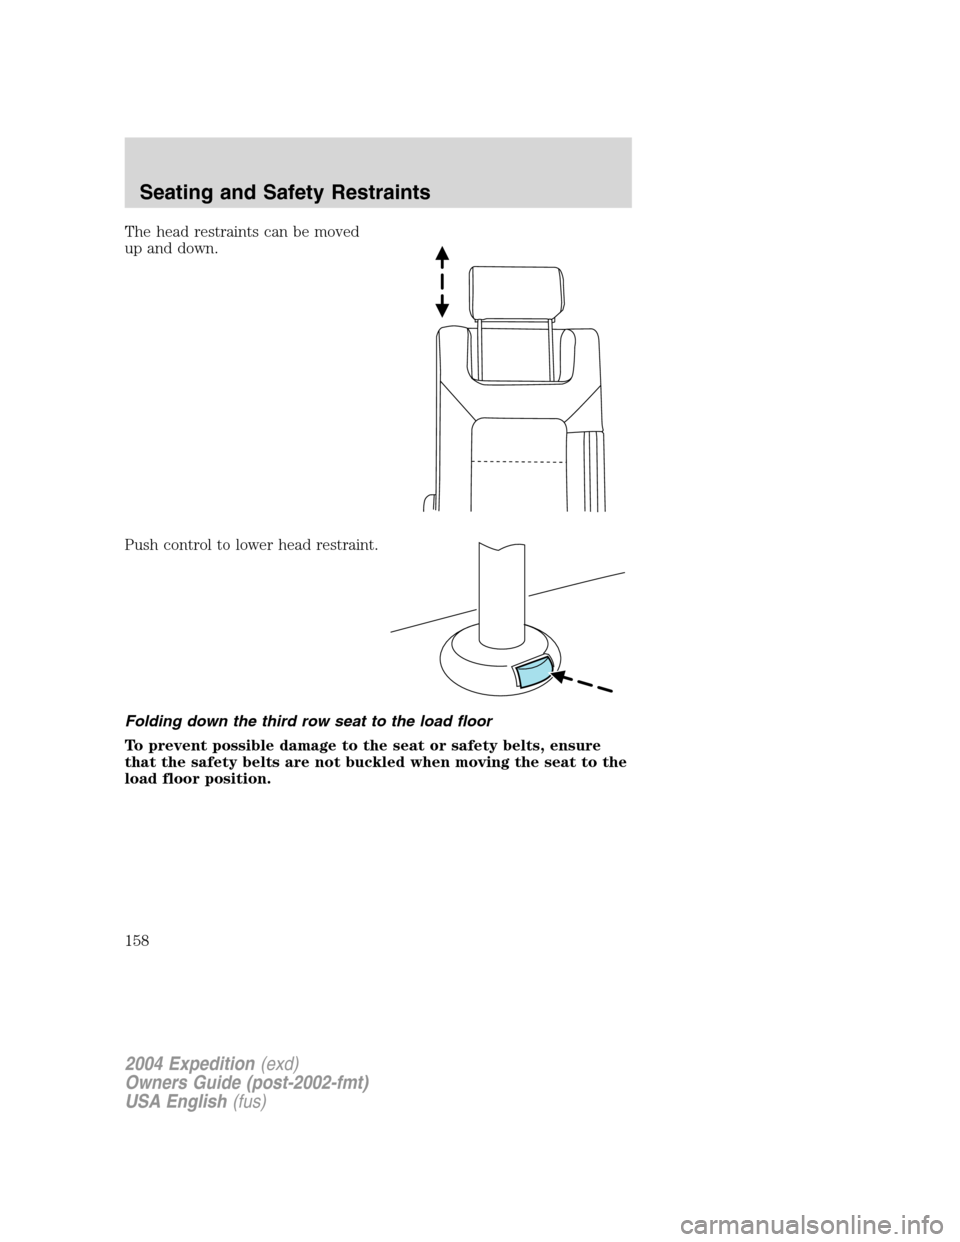 FORD EXPEDITION 2004 2.G Owners Manual The head restraints can be moved
up and down.
Push control to lower head restraint.
Folding down the third row seat to the load floor
To prevent possible damage to the seat or safety belts, ensure
tha